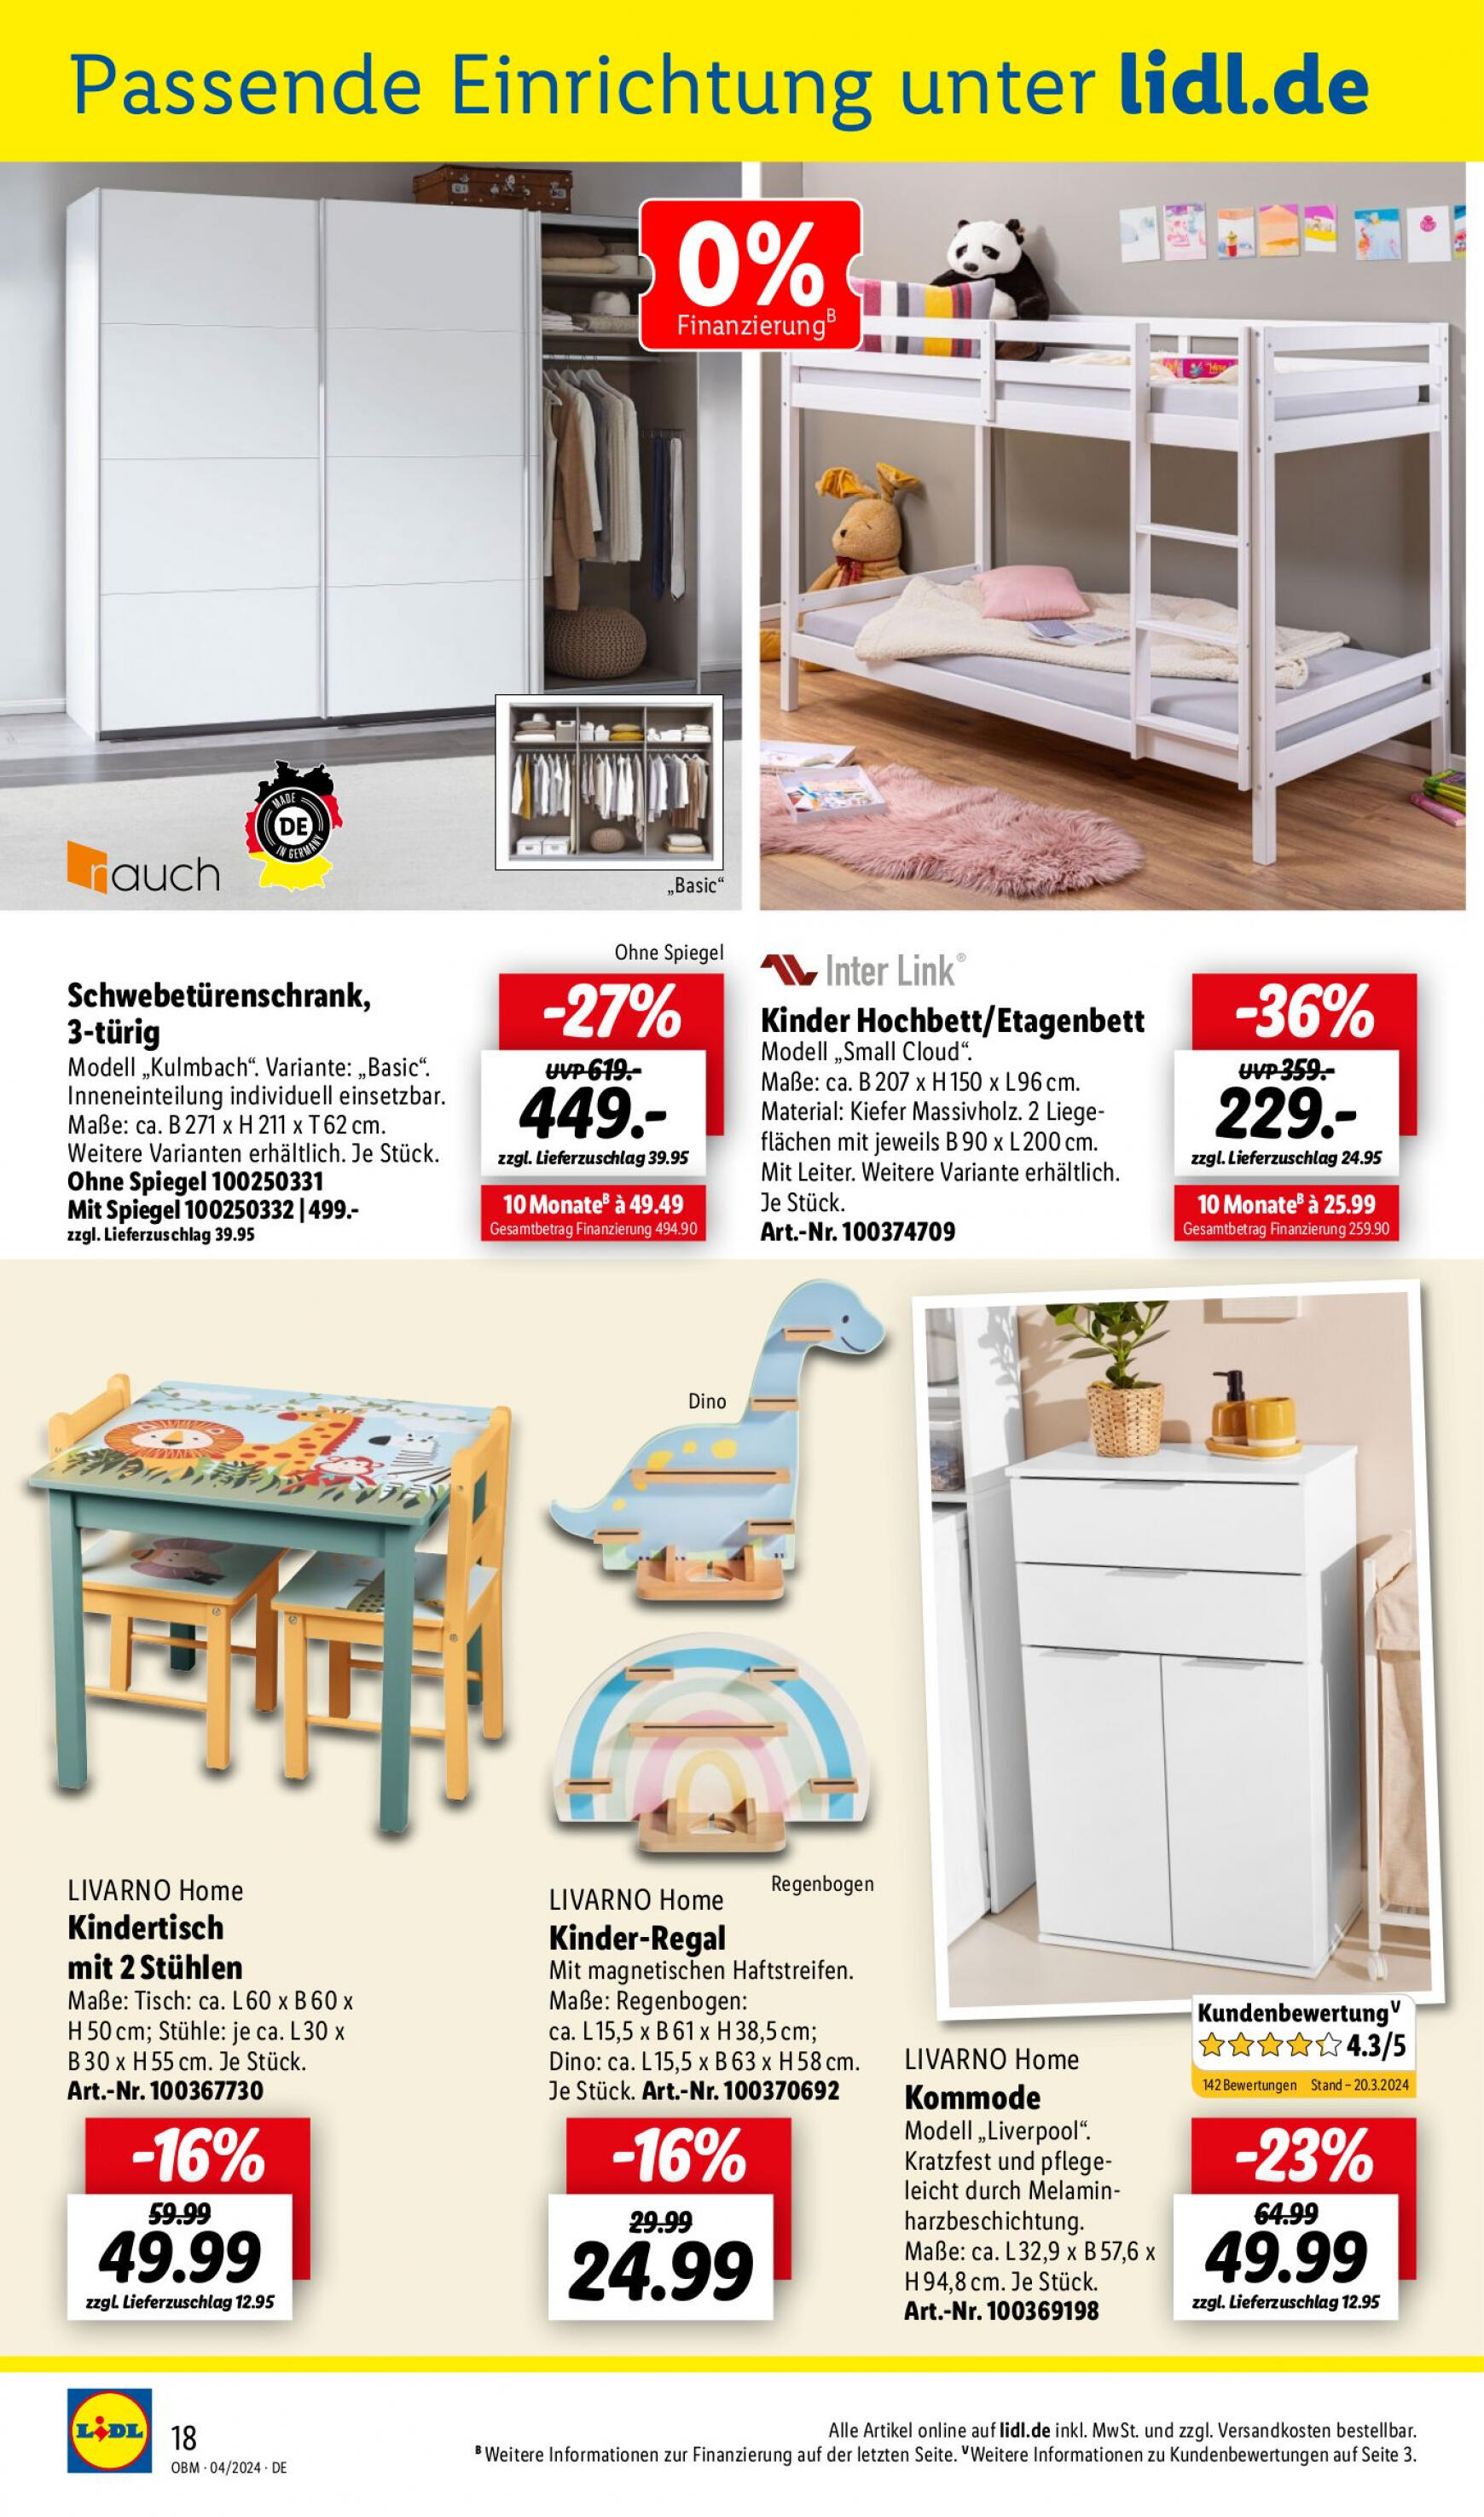 lidl - Flyer Lidl - Aktuelle Onlineshop-Highlights aktuell 01.04. - 30.04. - page: 18